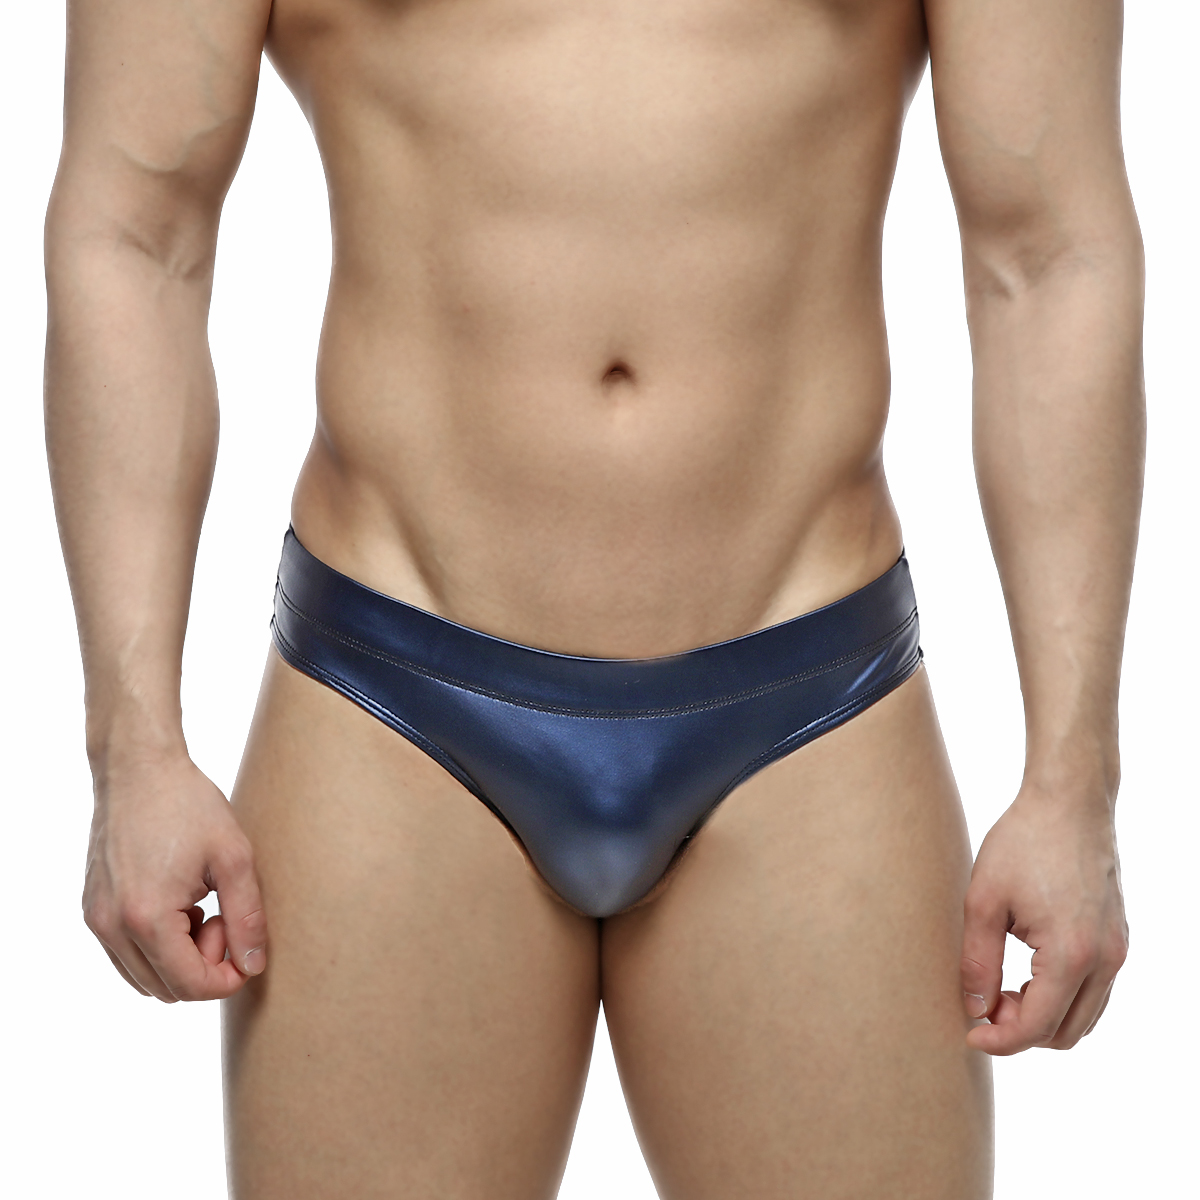 [MetroMuscleWear] Basic Competition Suit Navy (4974-70)